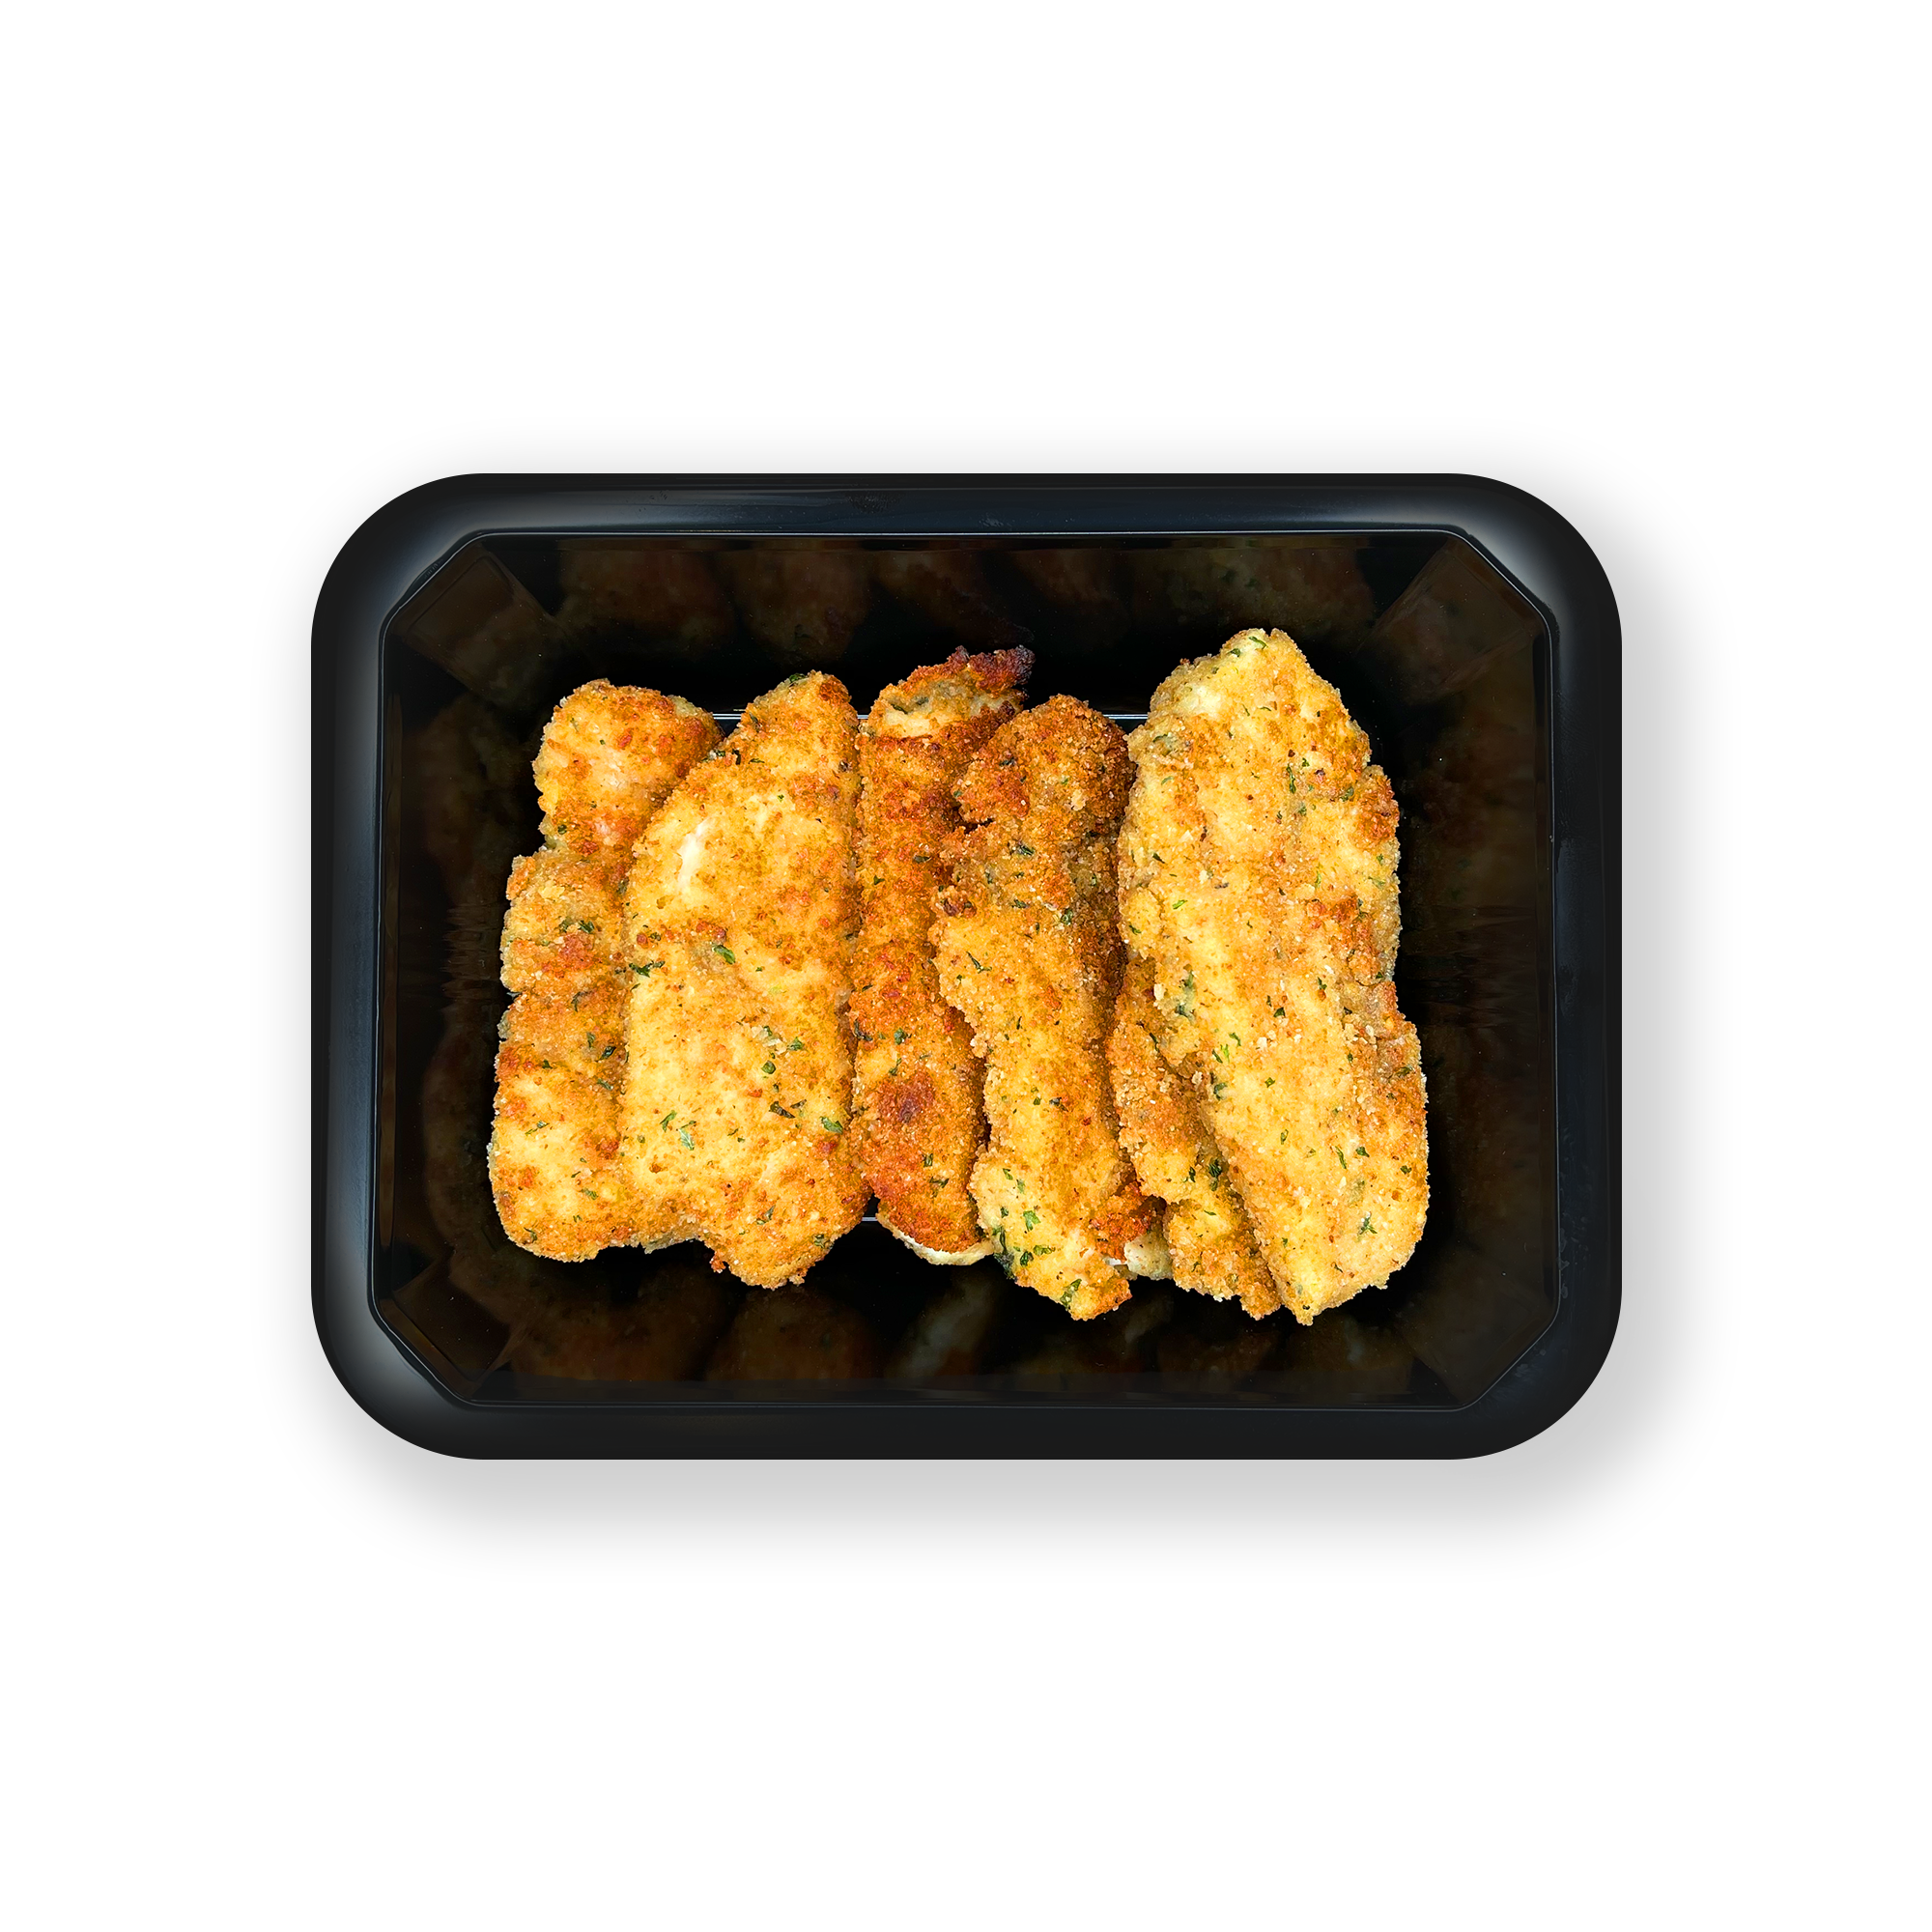 What's included in Chicken Tenders by the Pound